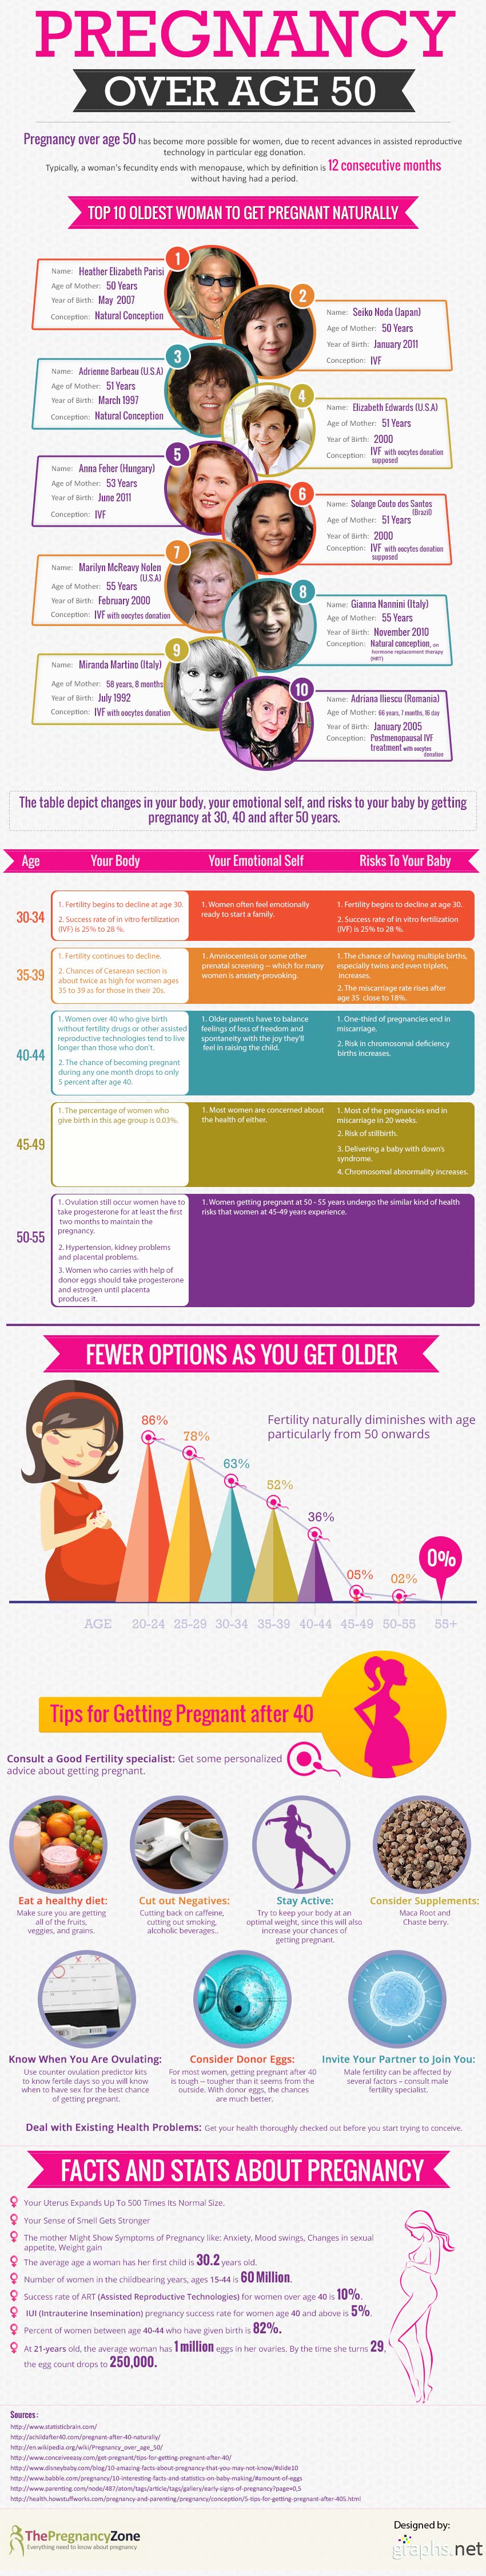 Mothers over 50-Infographic